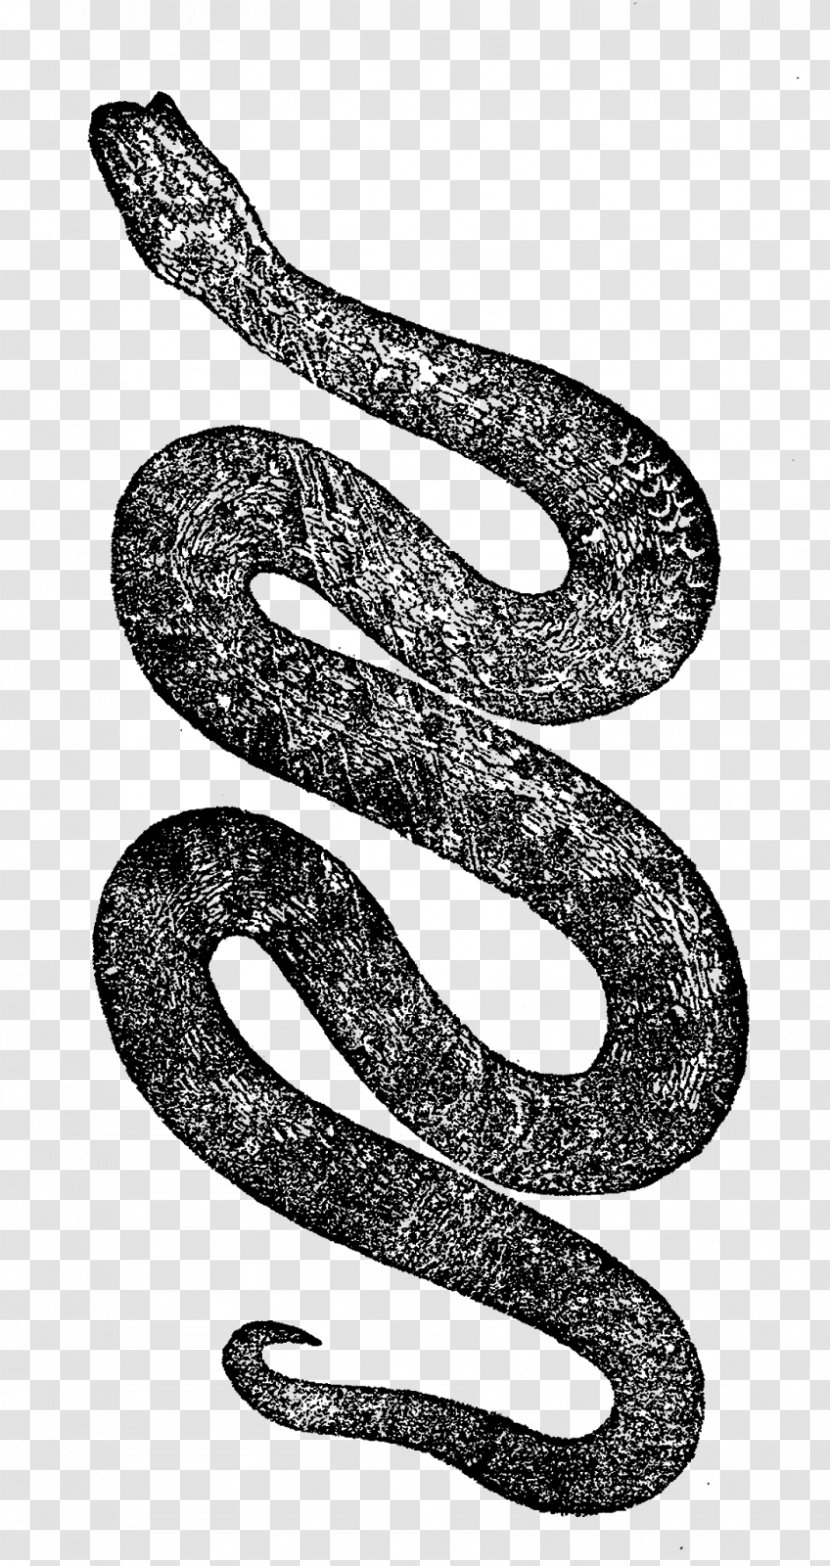 Snake Reptile Vipers - Rattlesnake - Snakes Transparent PNG